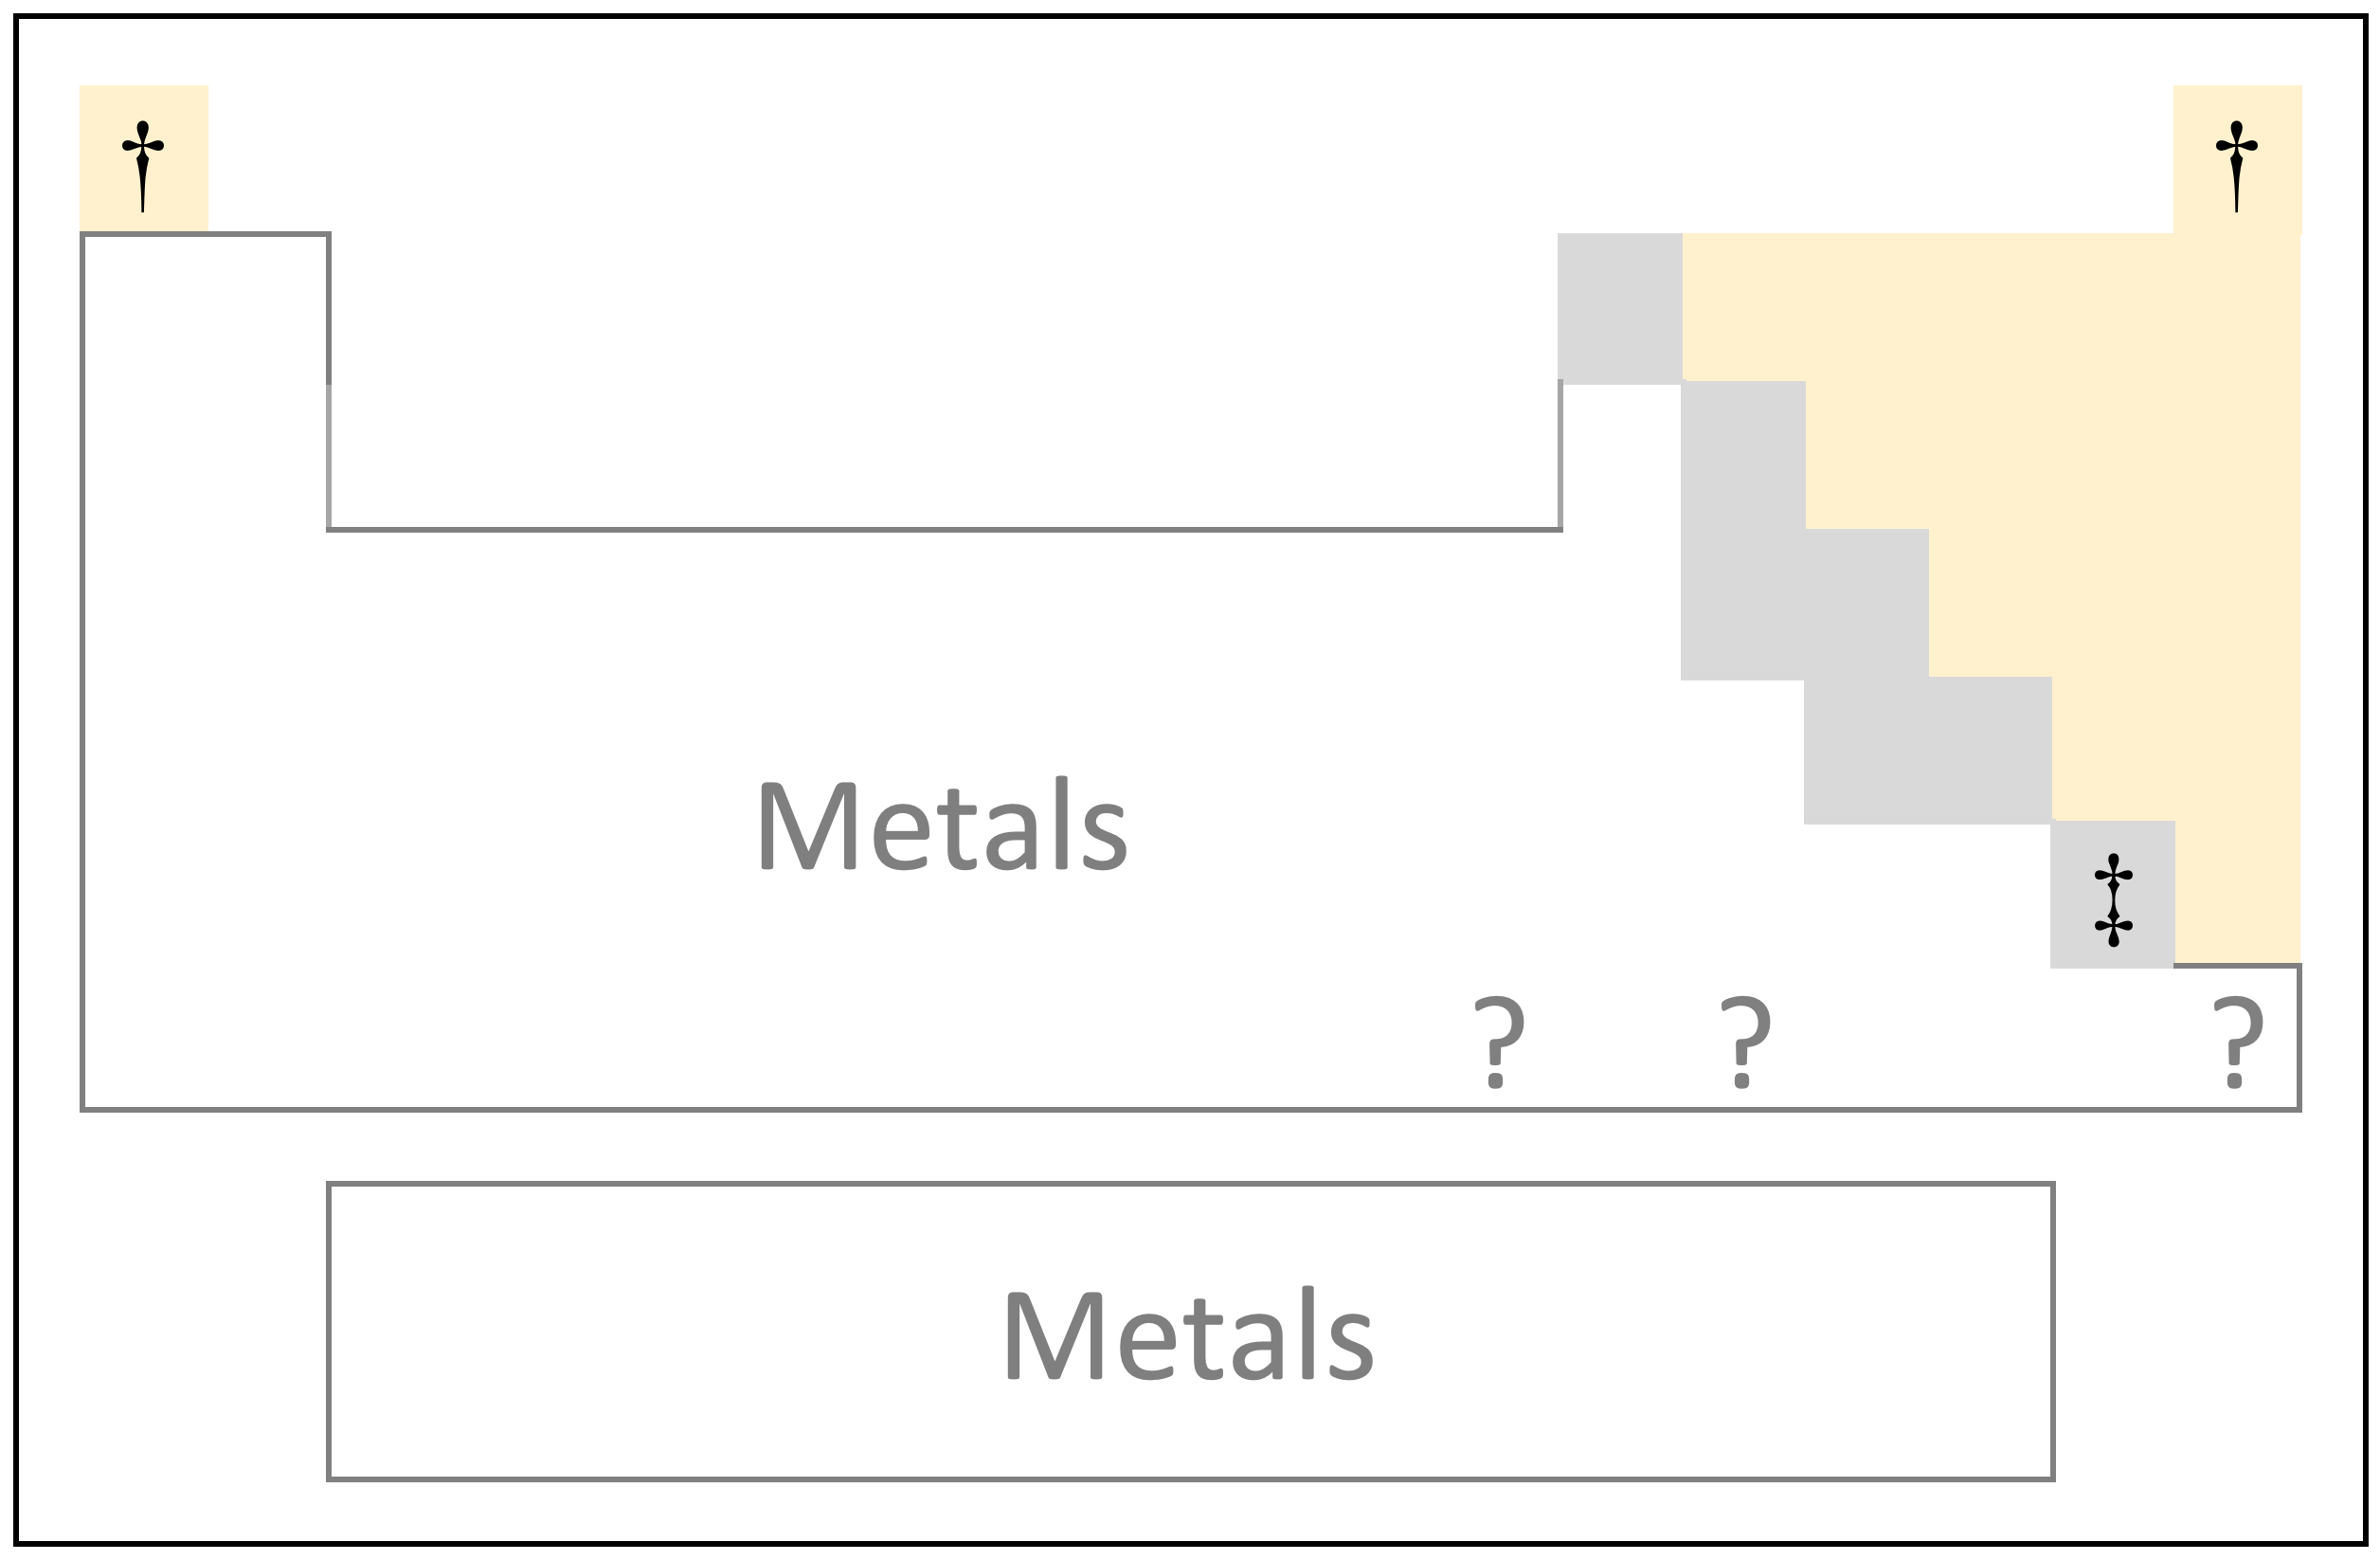 File:Metals in the periodic table.png - Wikipedia